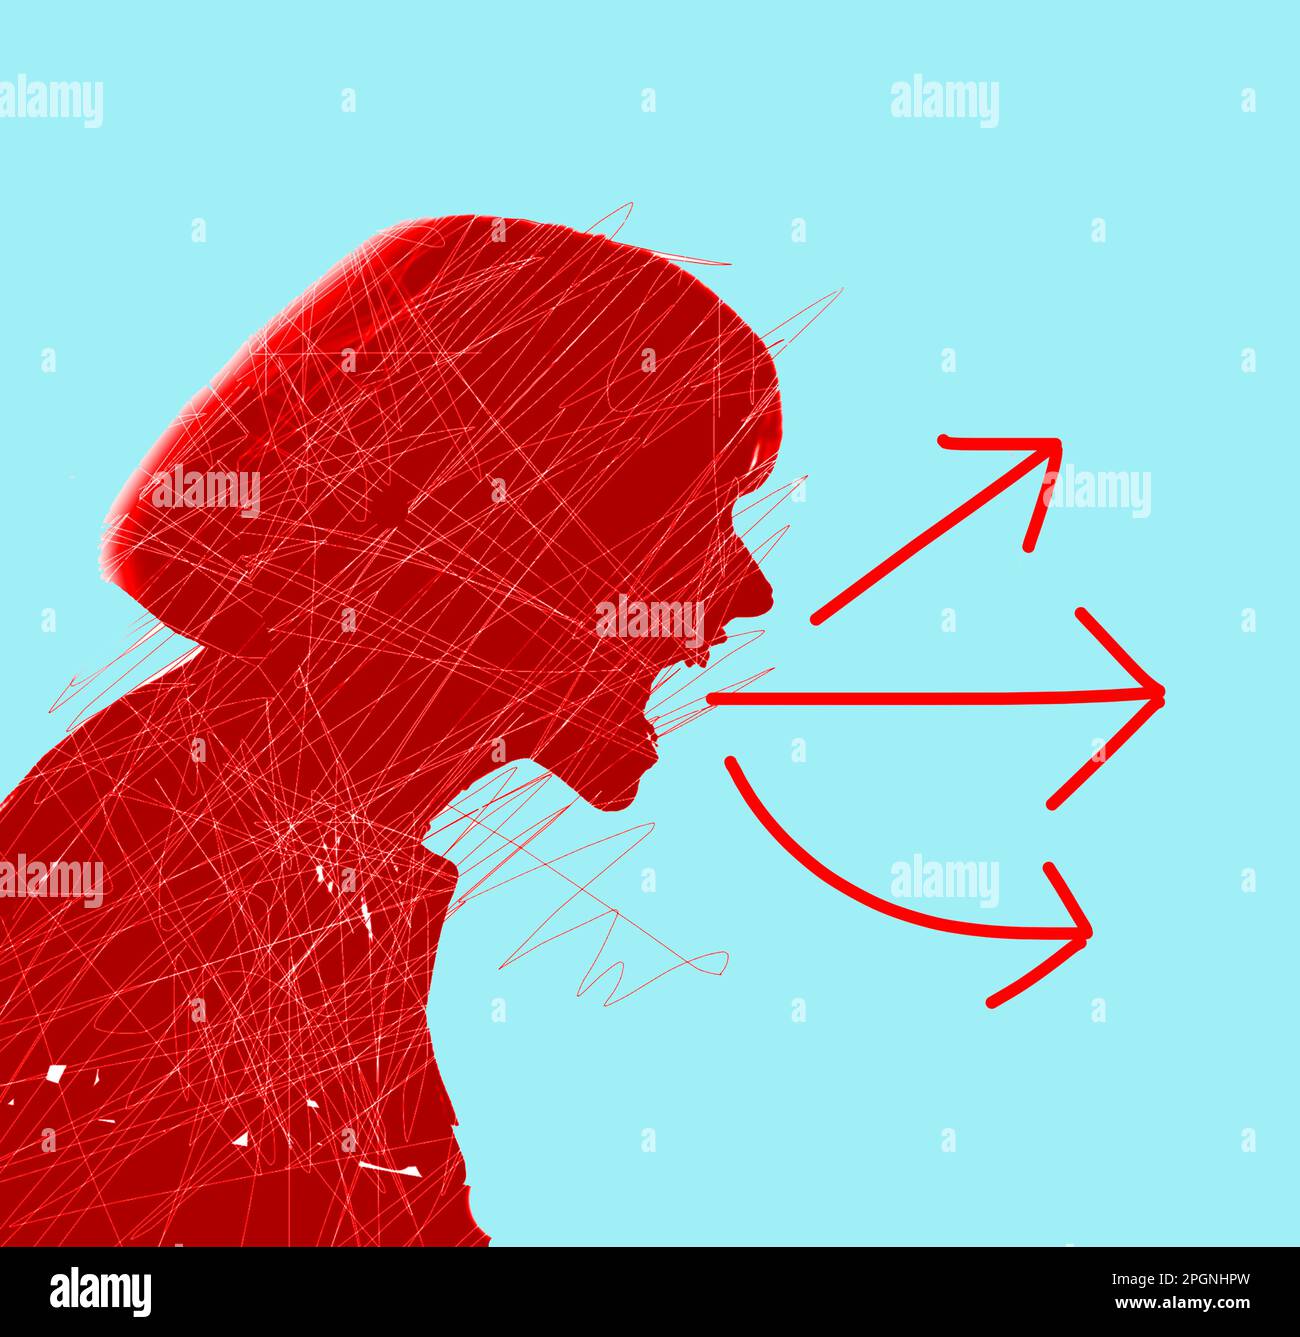 Illustration of red arrows coming out of mouth of screaming woman Stock Photo